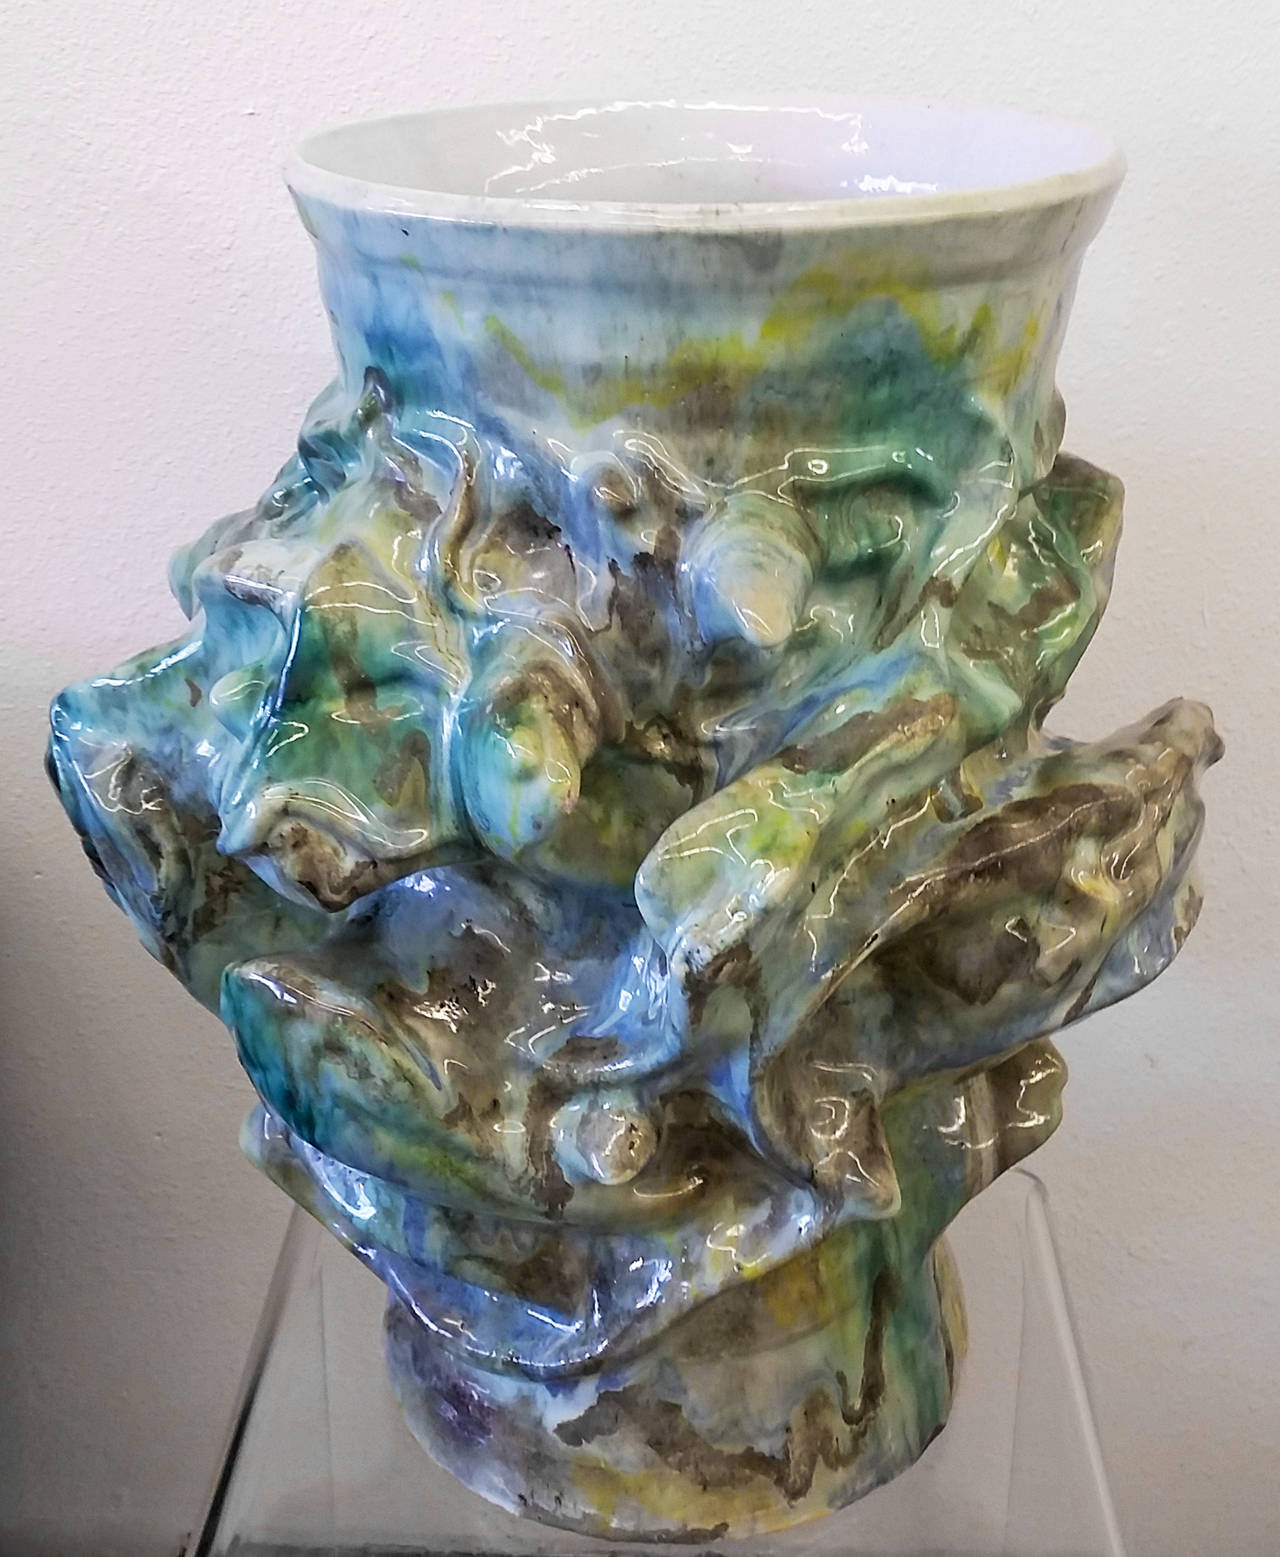 A monumental vessel by Elena Karina. Karina held the positions of Craft coordinator (1974-1978) at the National Endowment for The Arts, and special assistant for the arts to the office of the vice president, the white house (1978-80). This piece was